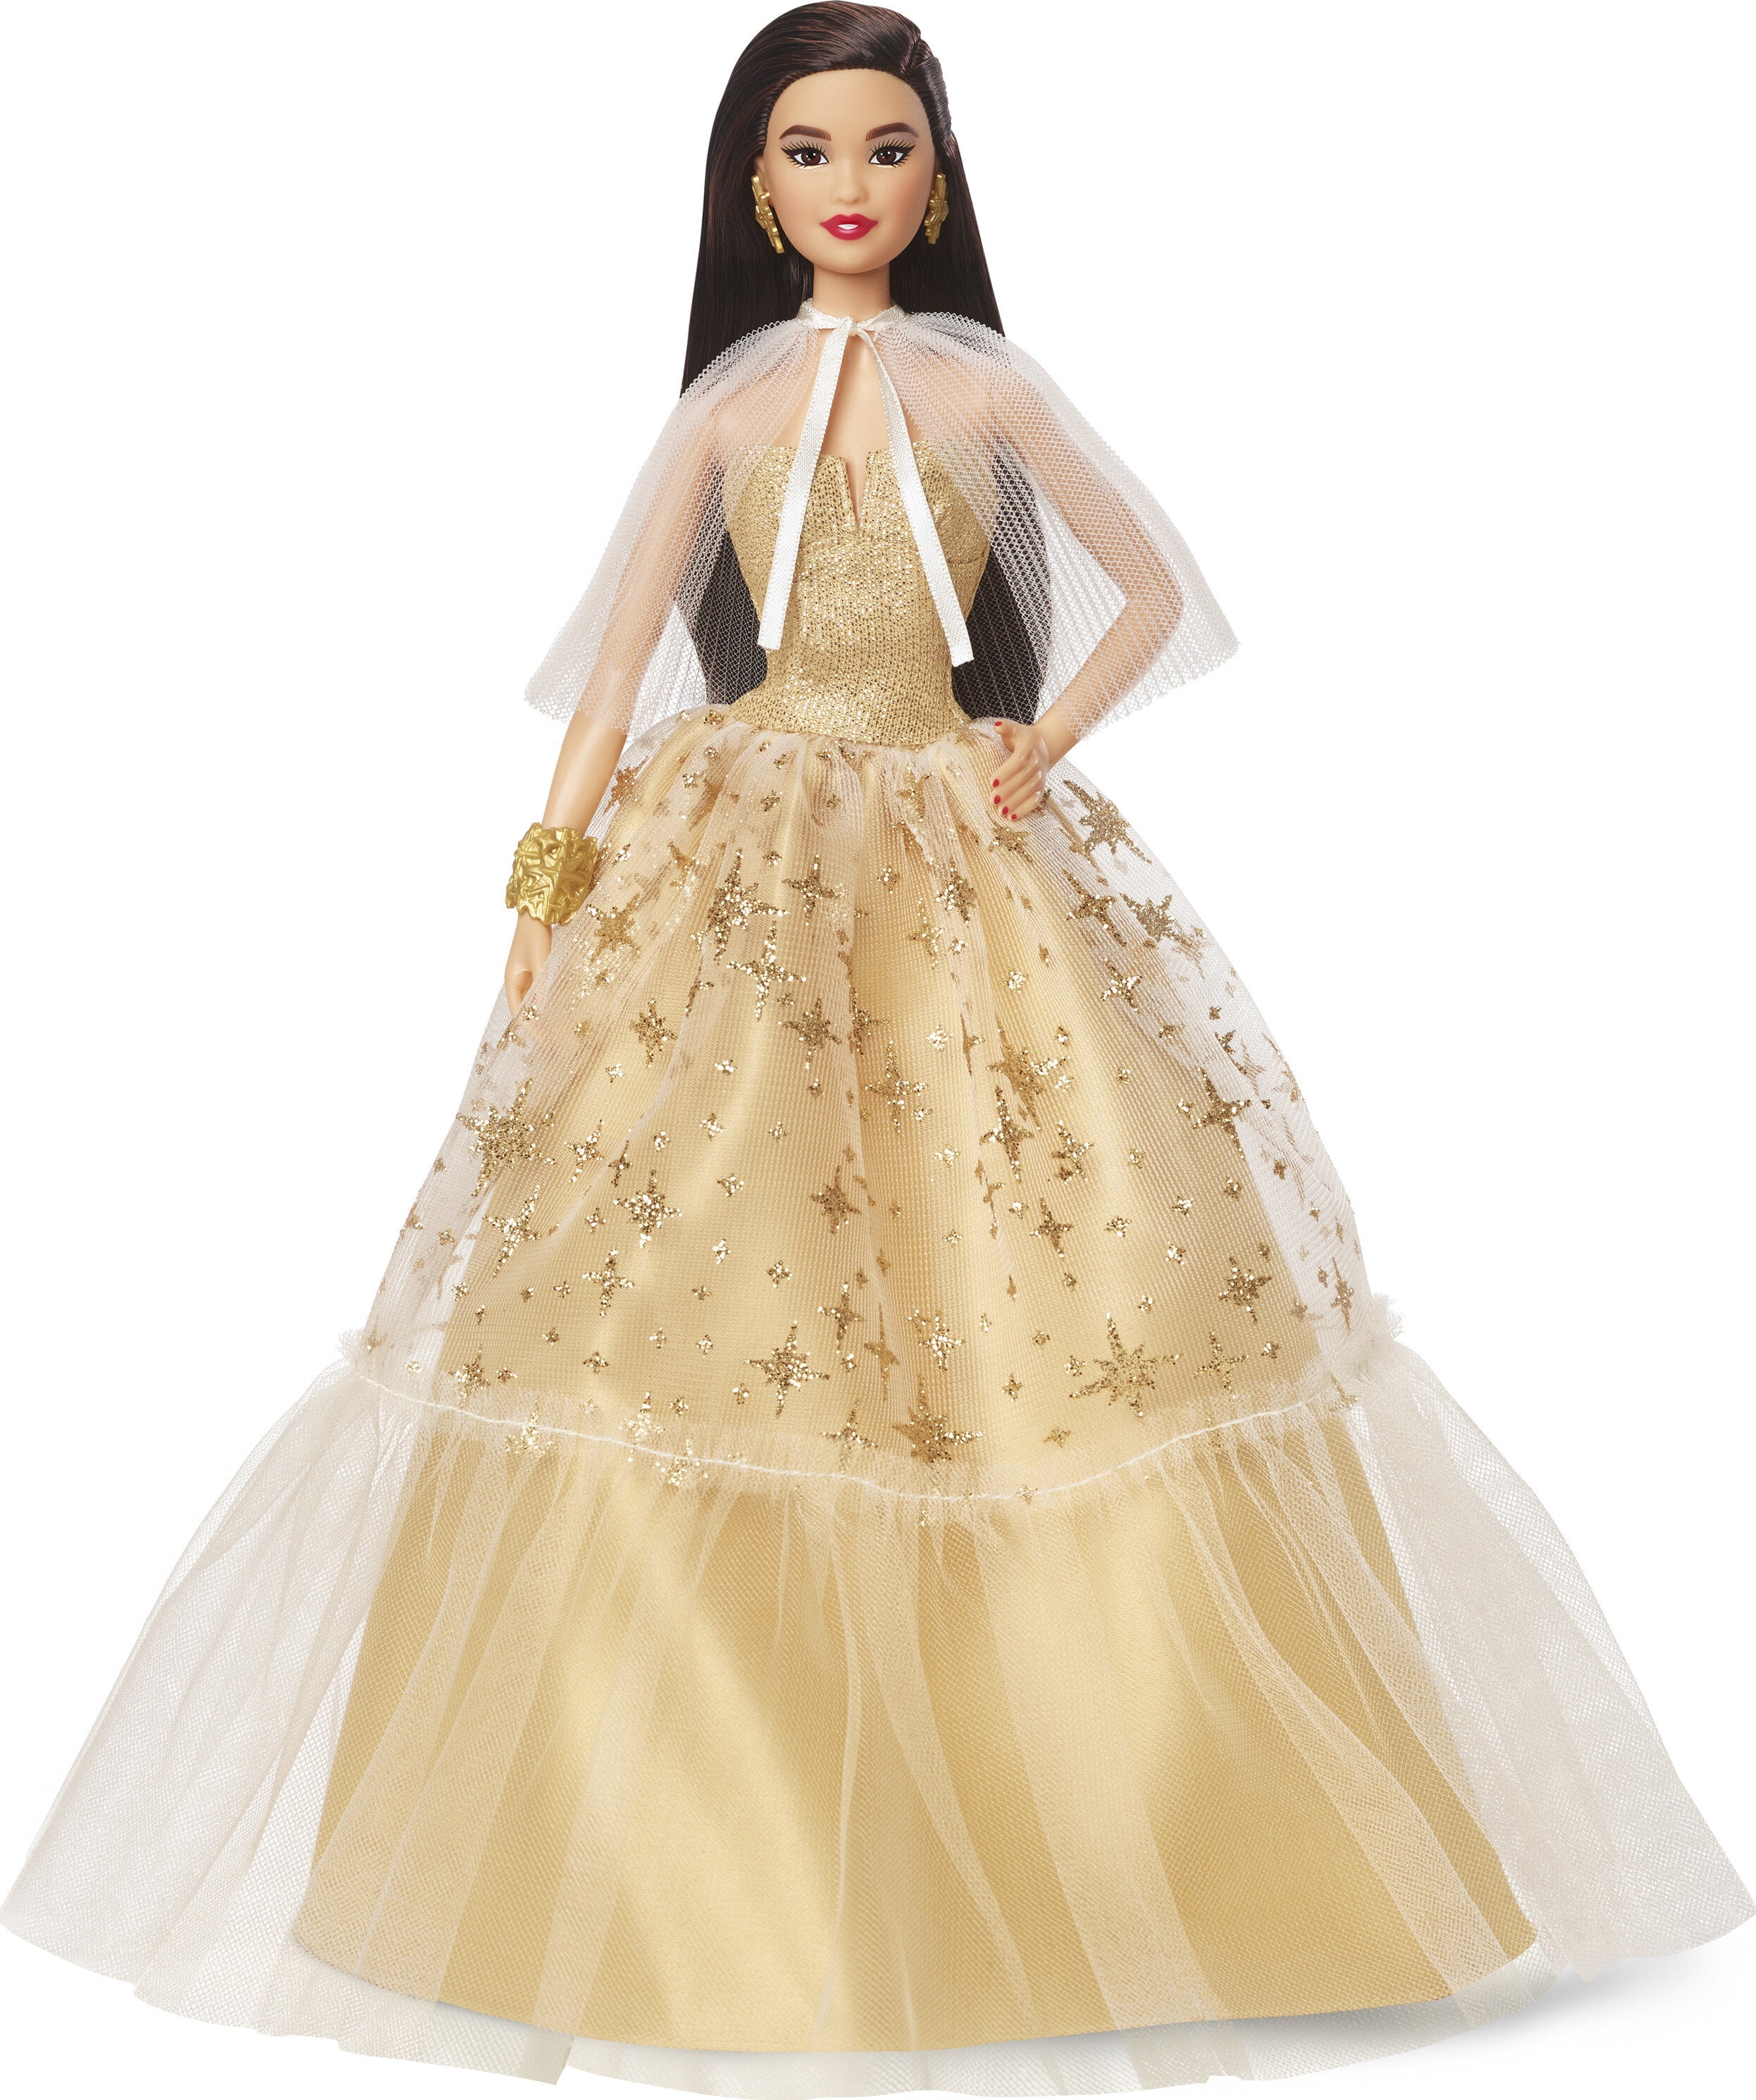 Olivias Doll Closet A Beautiful Pink Pucci Inspired Ball Gown Made To Fit  The Barbie - A Beautiful Pink Pucci Inspired Ball Gown Made To Fit The  Barbie . Buy Doll toys